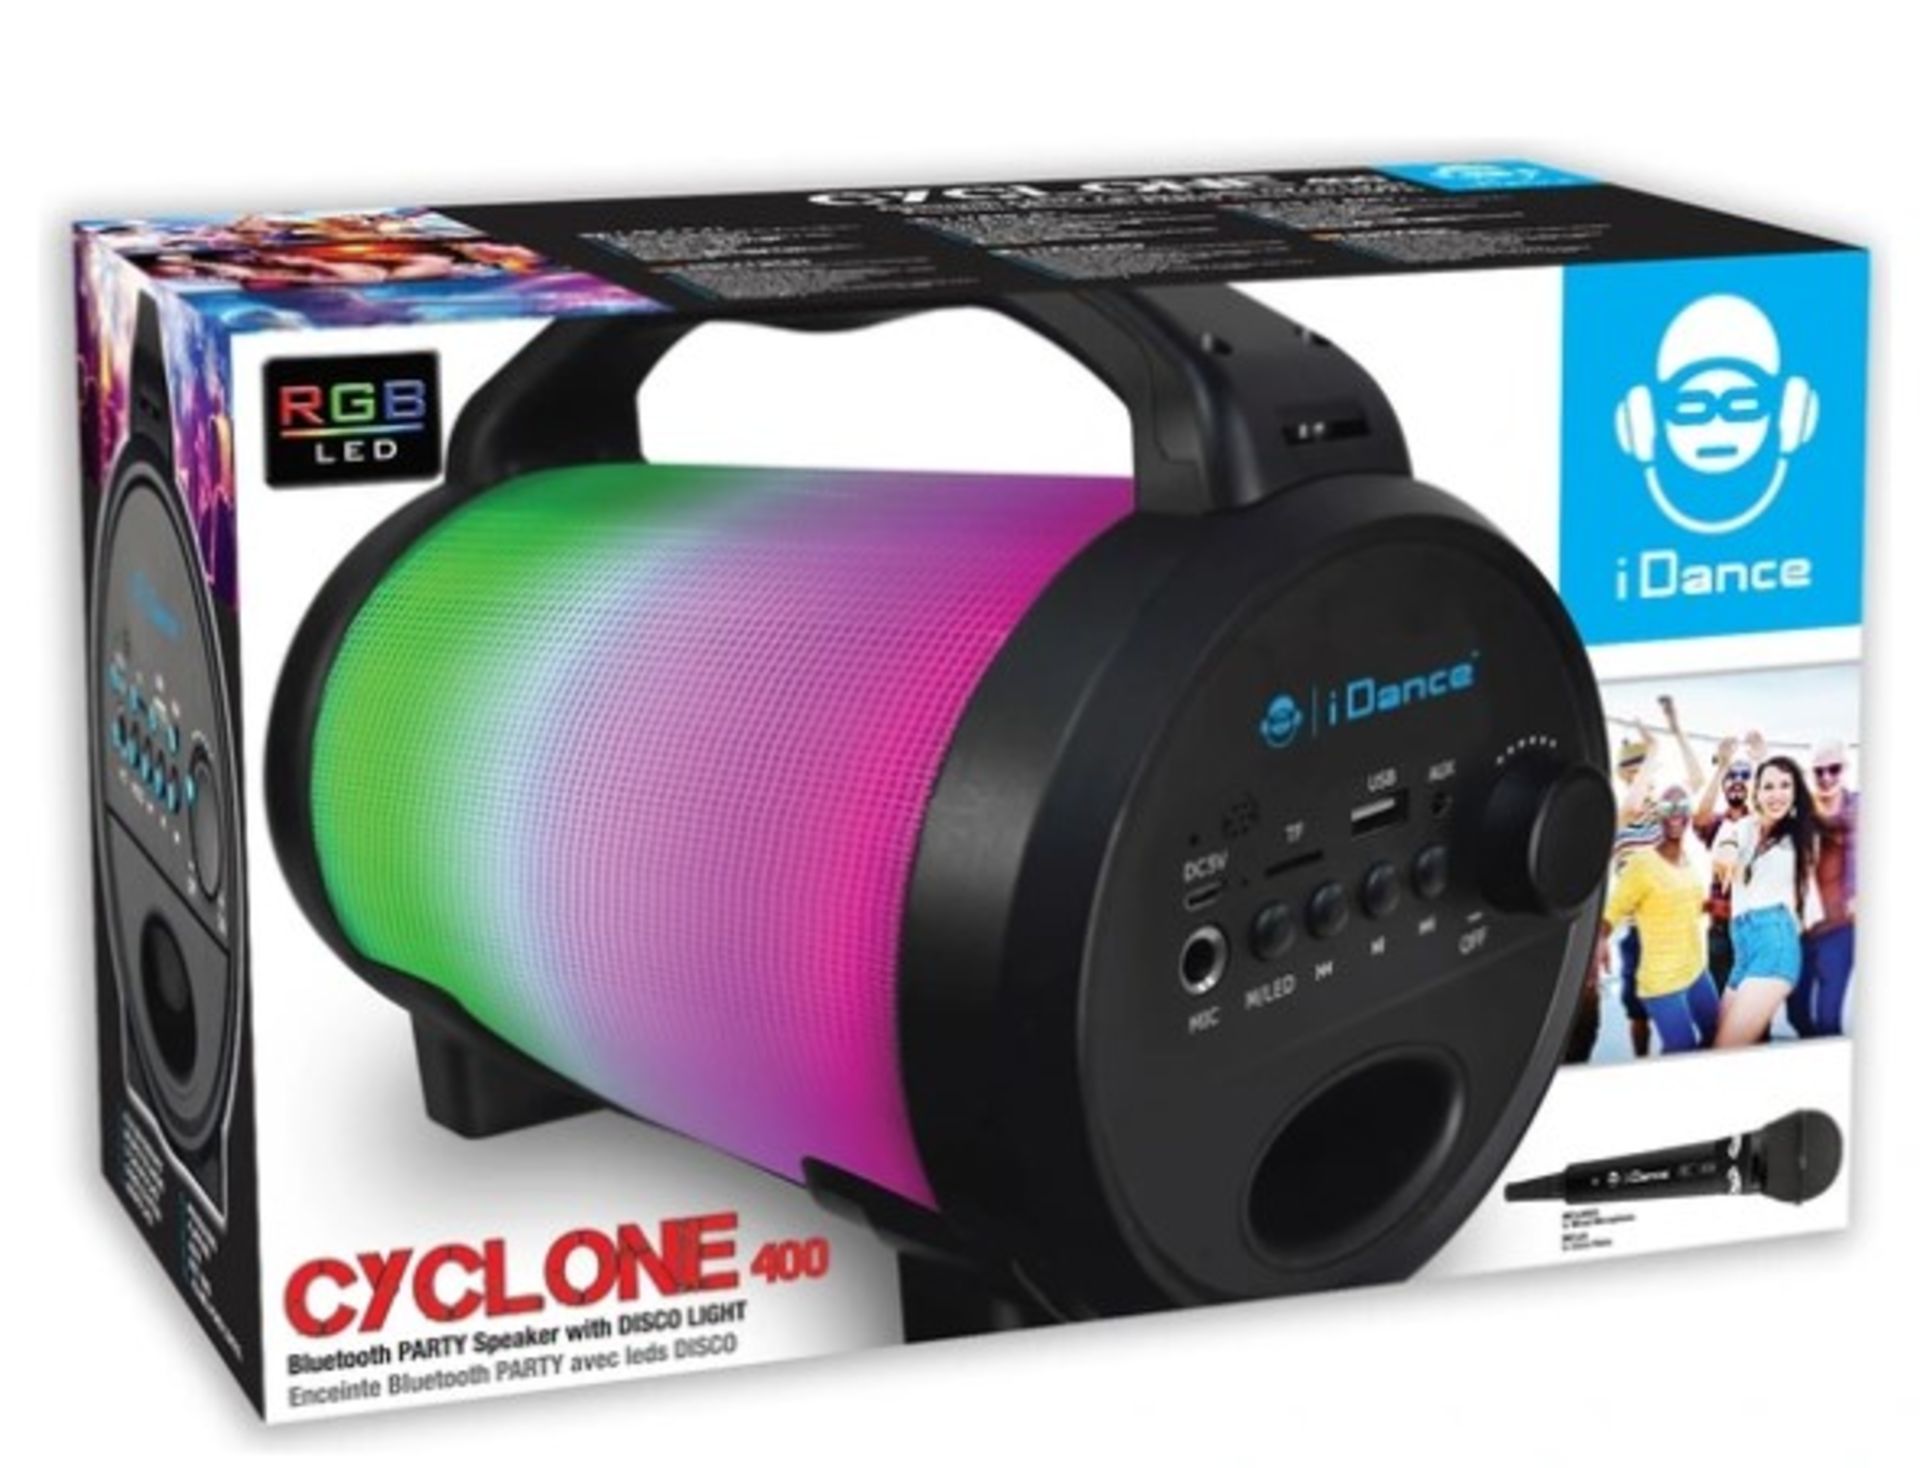 (6G) Lot RRP £150.00. 5x iDance Cyclone 400 Bluetooth Party Speaker With Disco Light RRP £30.0...